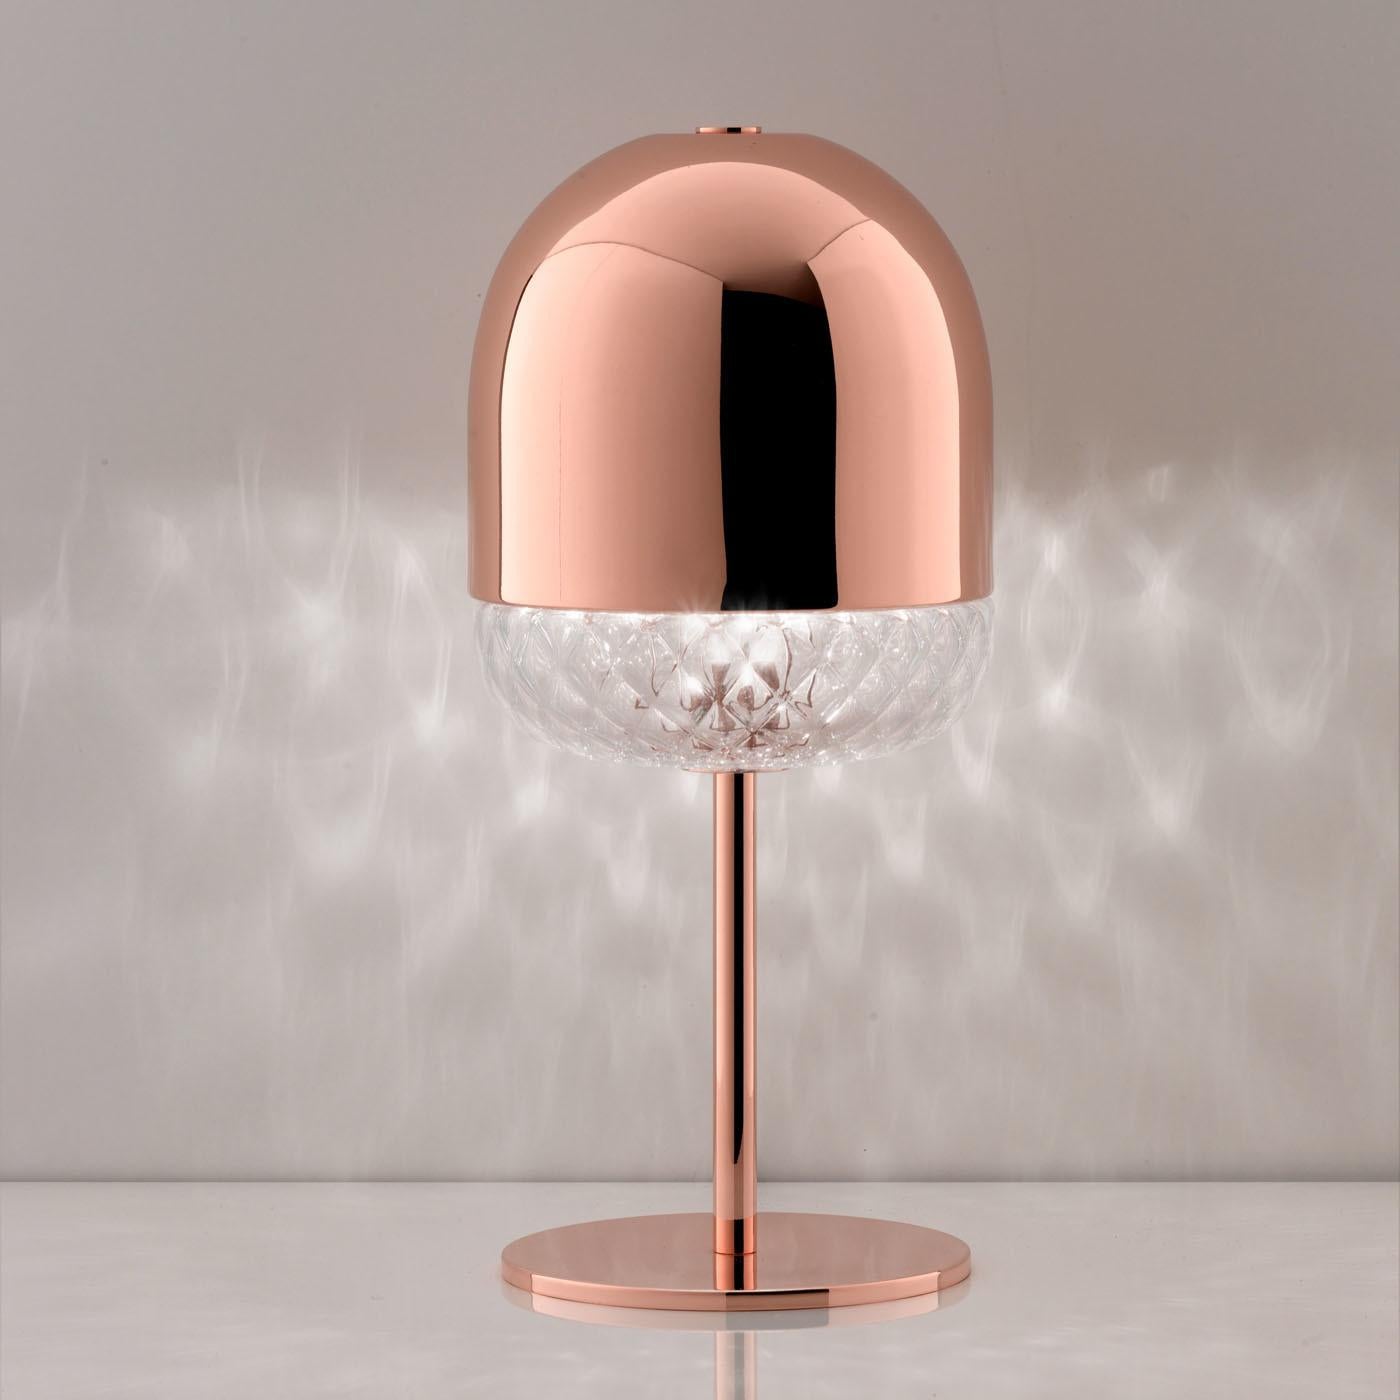 This elegant table lamp designed by Matteo Zorzenoni is inspired by one of the oldest Venetian glass-blowing techniques, the Balloton. The light pierces through the veins of the glass section that decorates the bottom of the shade. The top of the